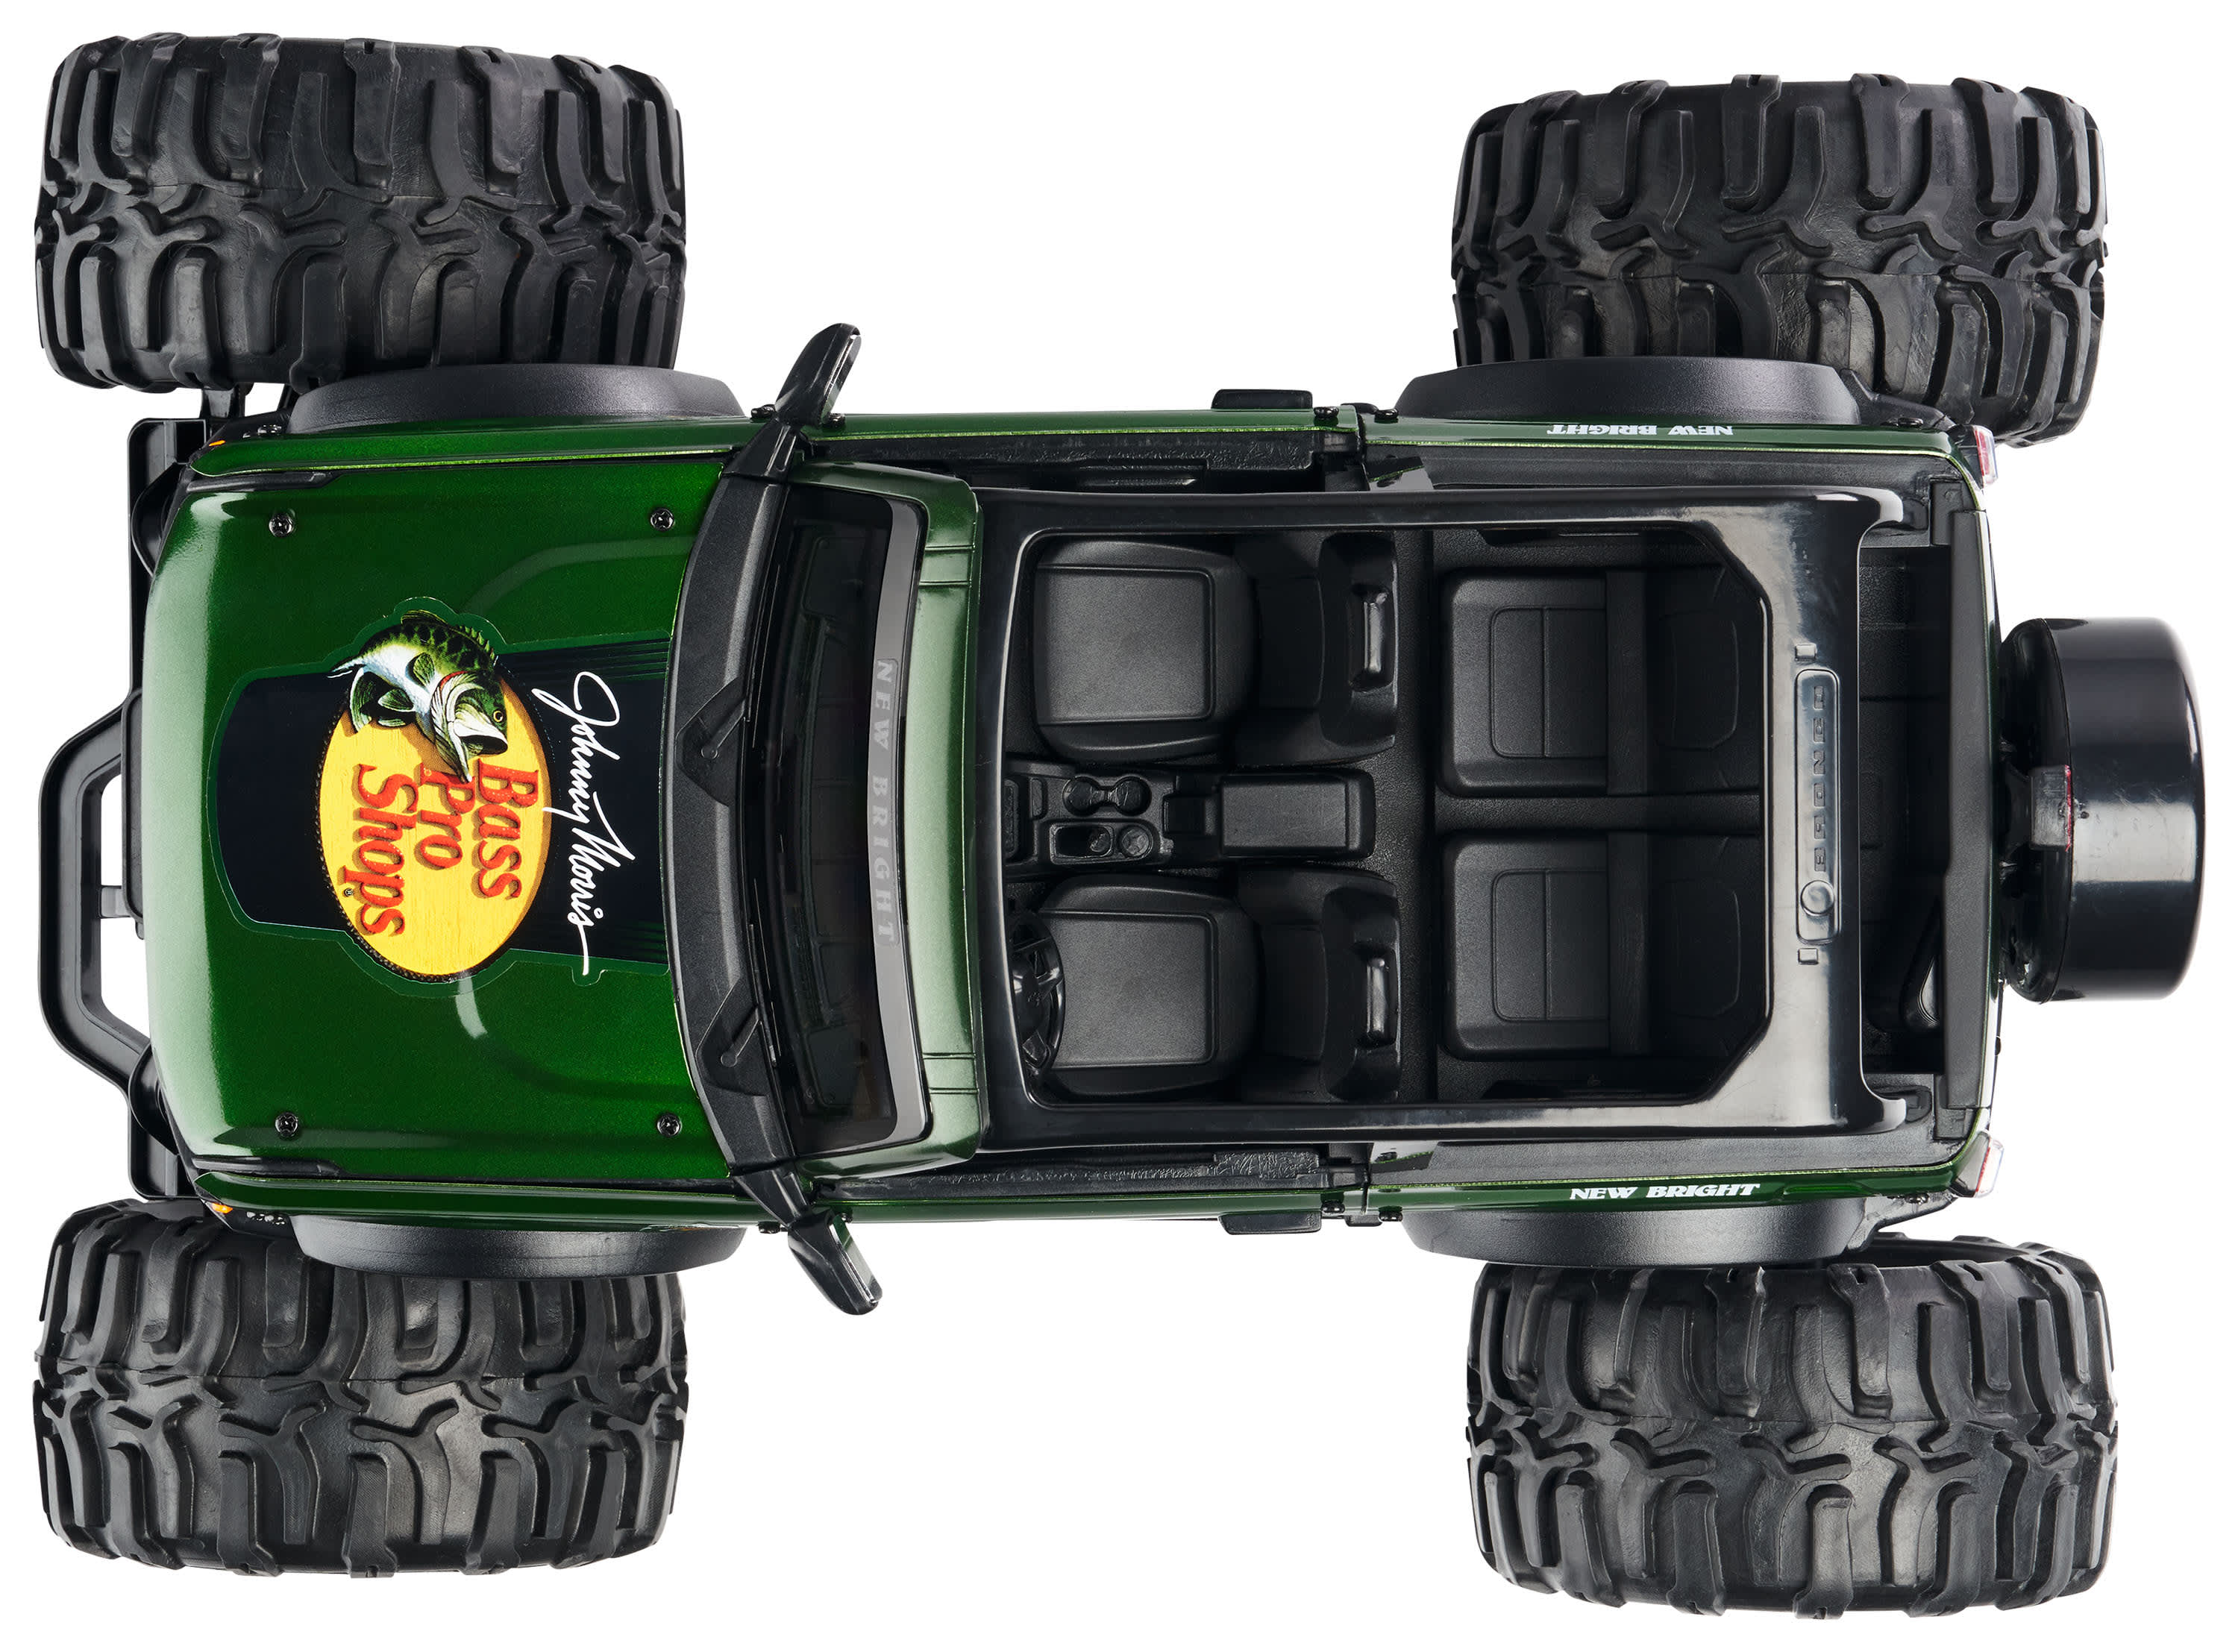 Bass Pro Shops® Heavy-Metal Ford® Bronco® 1:14 Remote-Control Truck